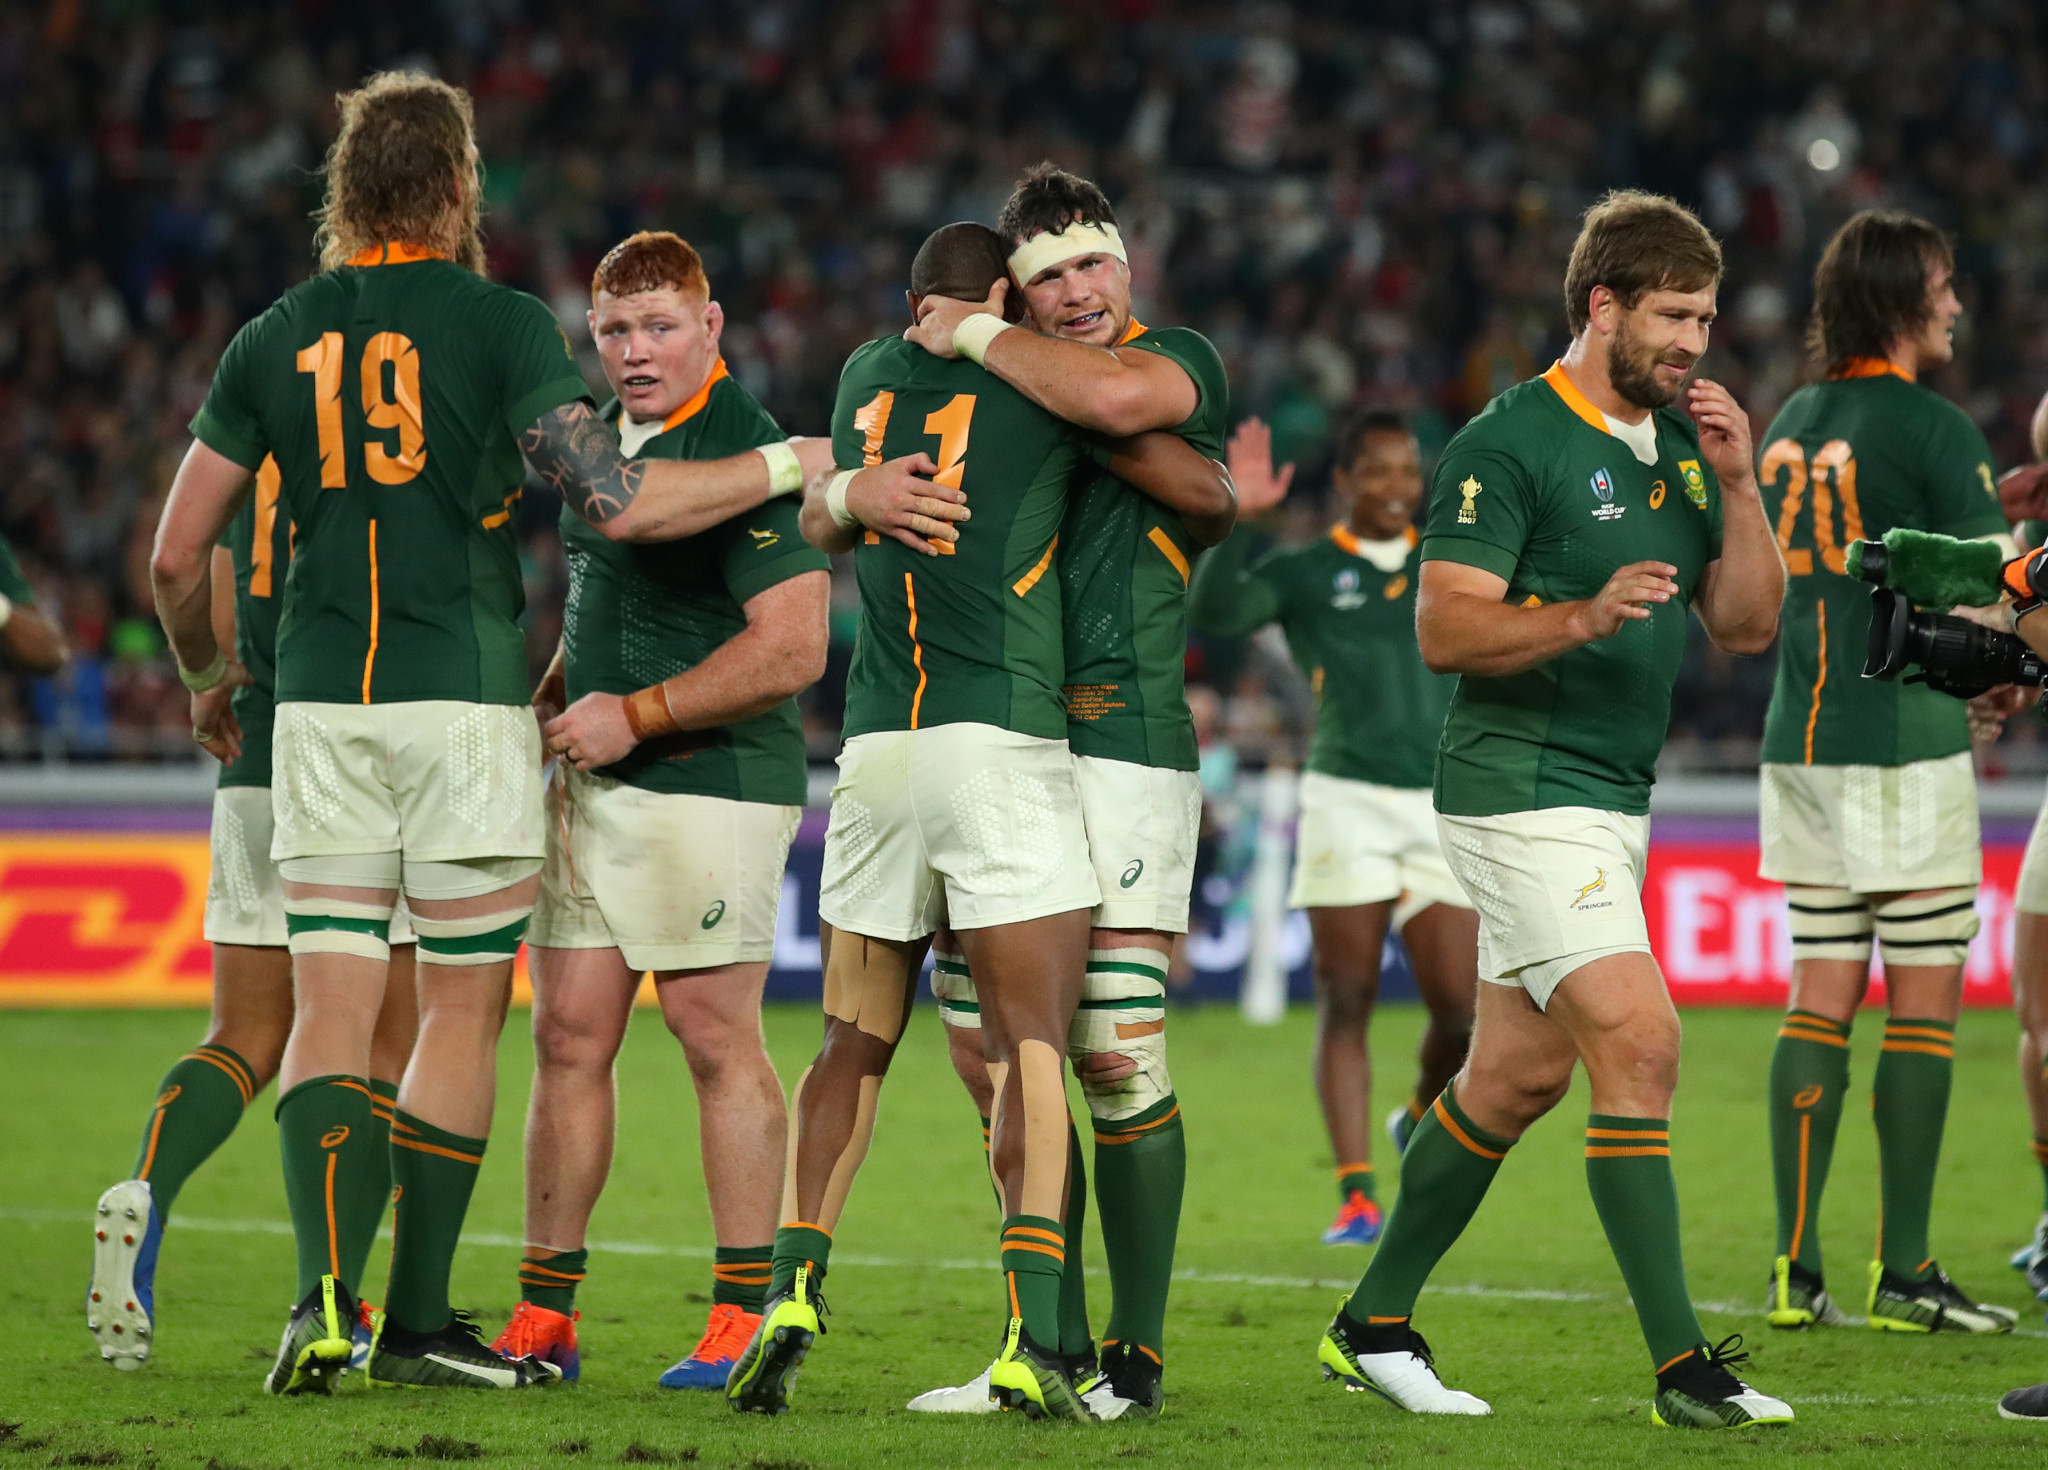 South Africa celebrated at the final whistle ©Getty Images